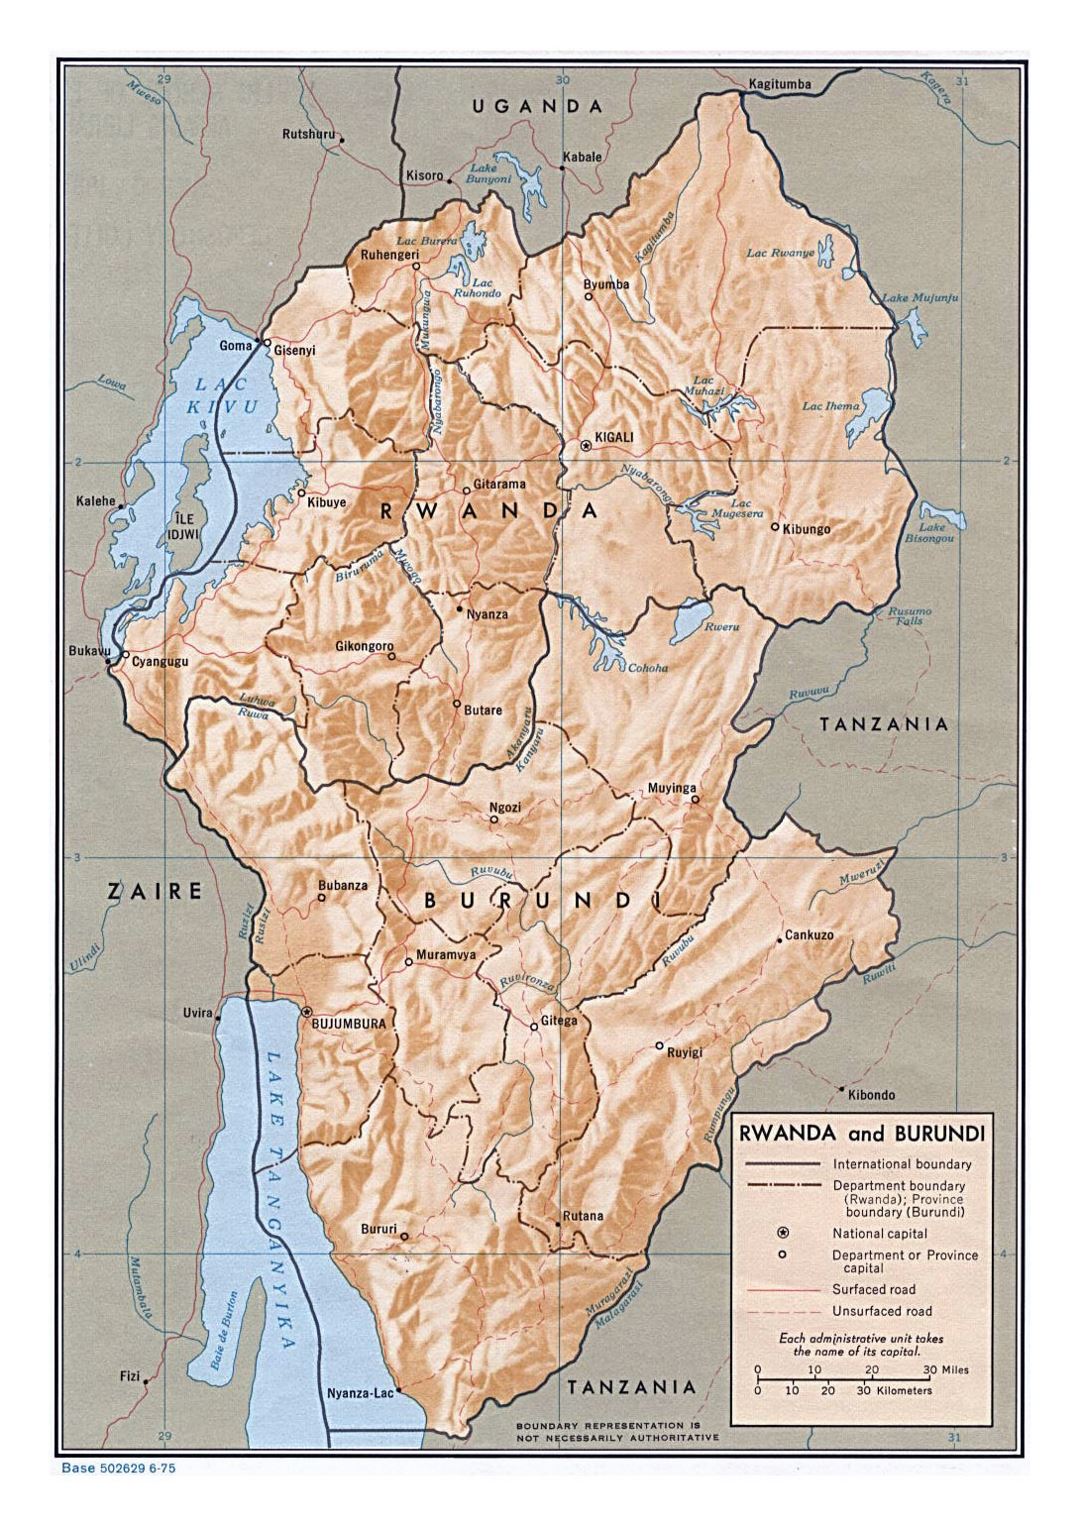 Detailed political and administrative map of Rwanda and Burundi with relief, roads and major cities - 1975